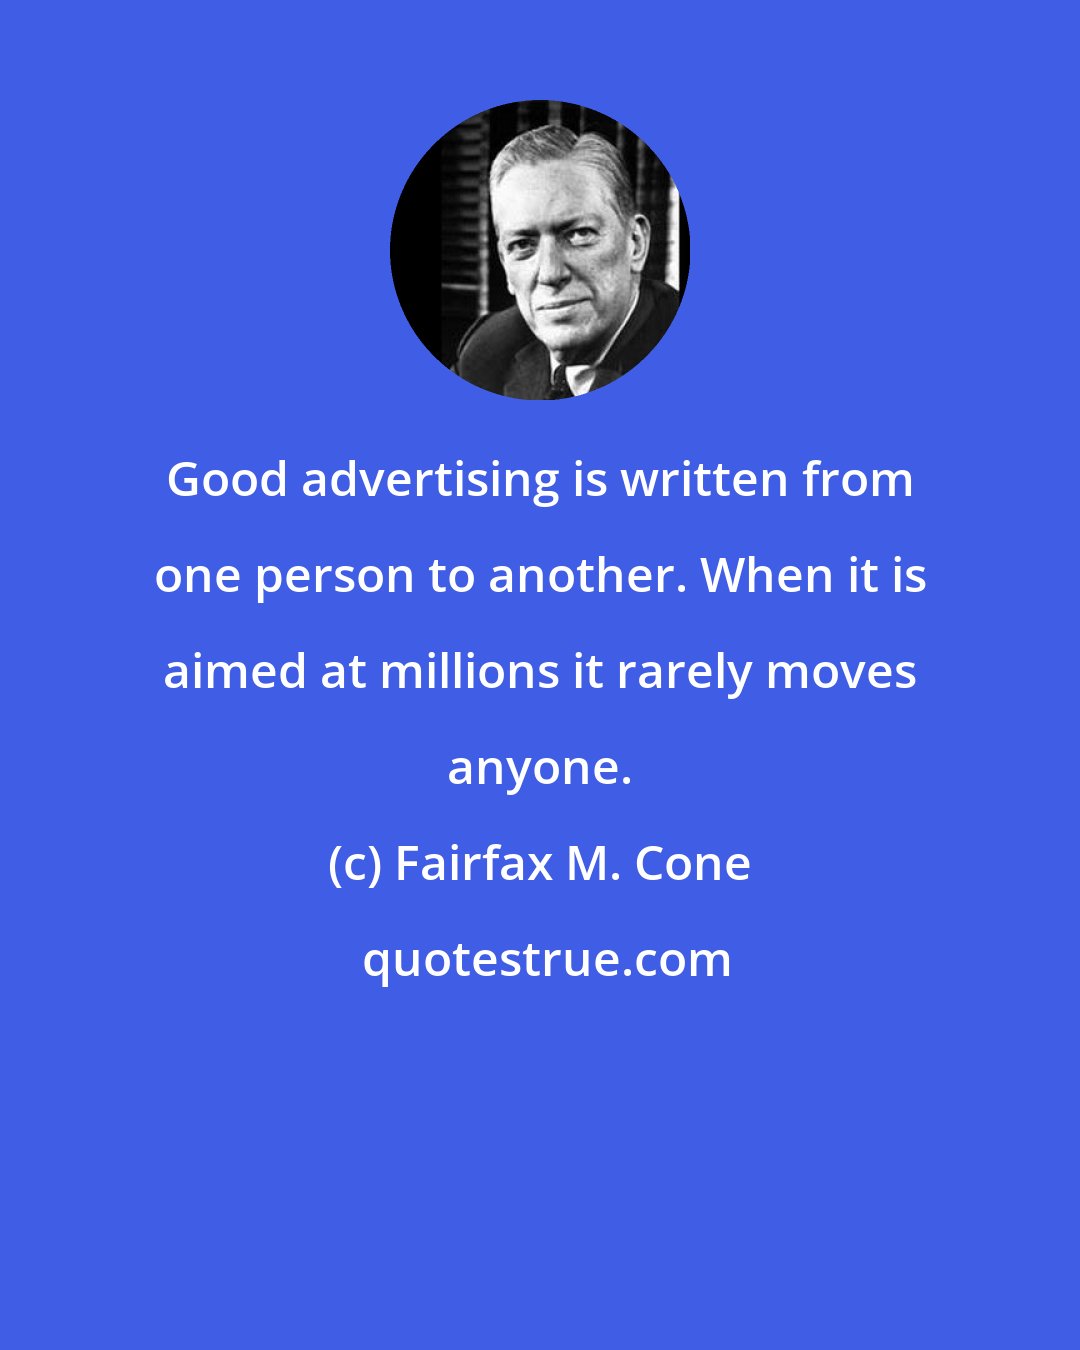 Fairfax M. Cone: Good advertising is written from one person to another. When it is aimed at millions it rarely moves anyone.